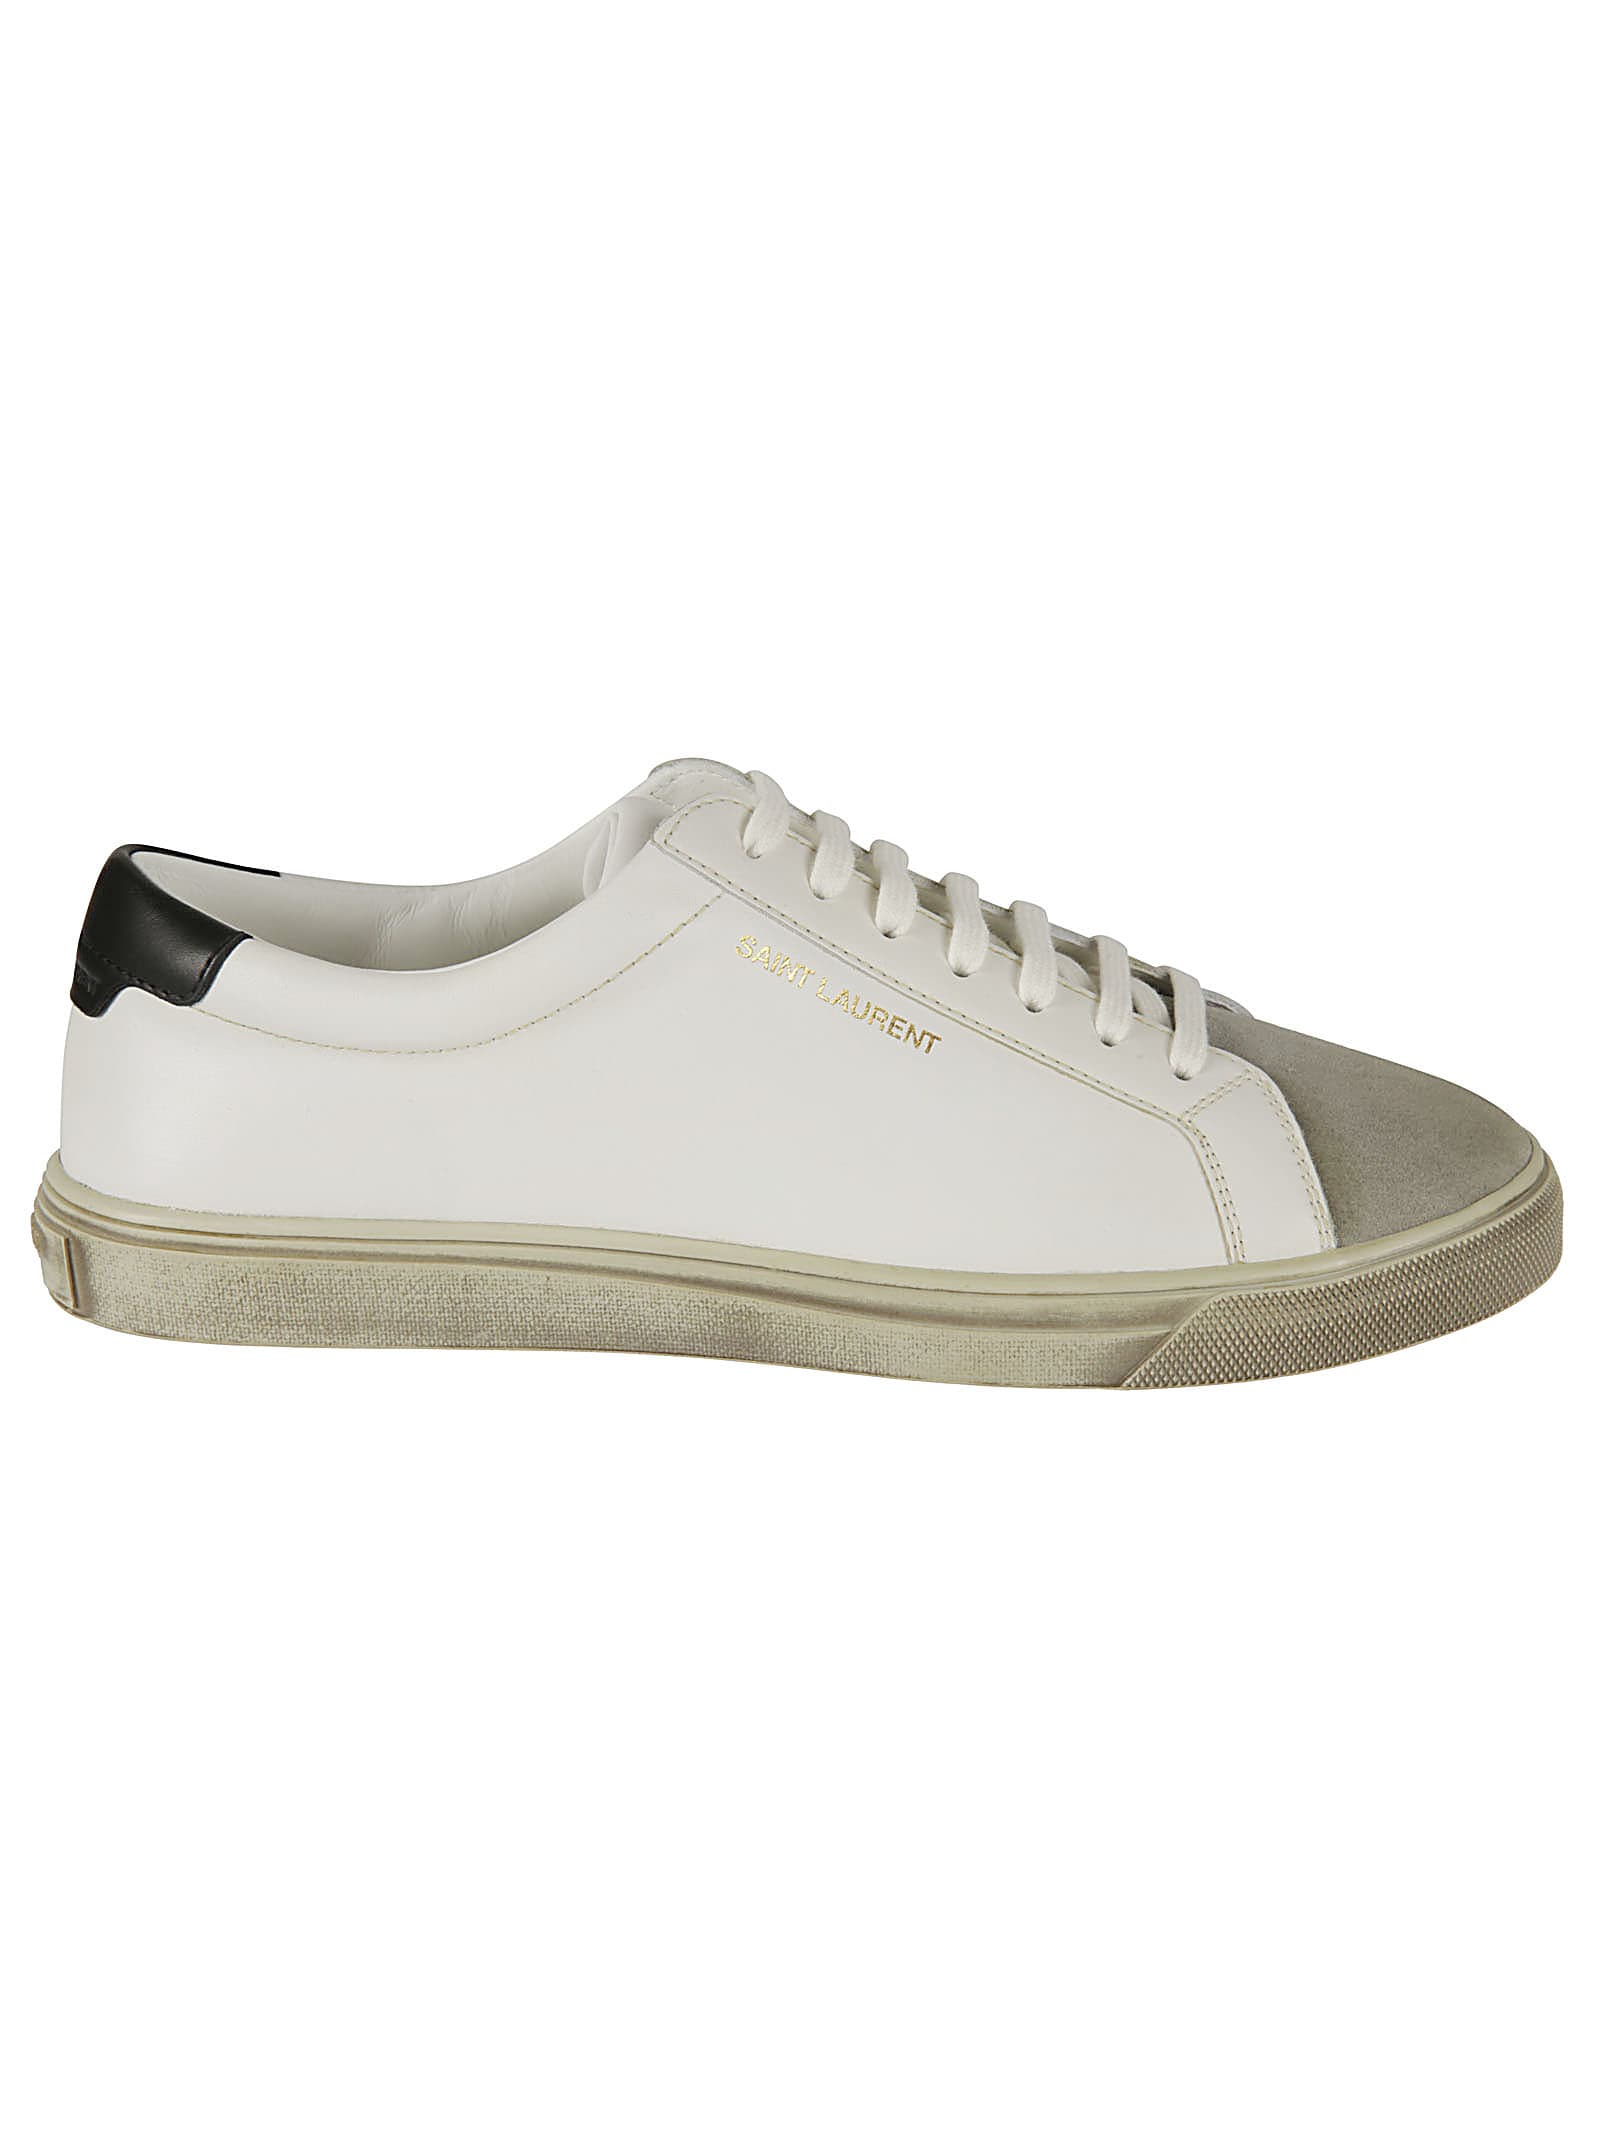 SAINT LAURENT ANDY LOW TOP AGE trainers,11288406